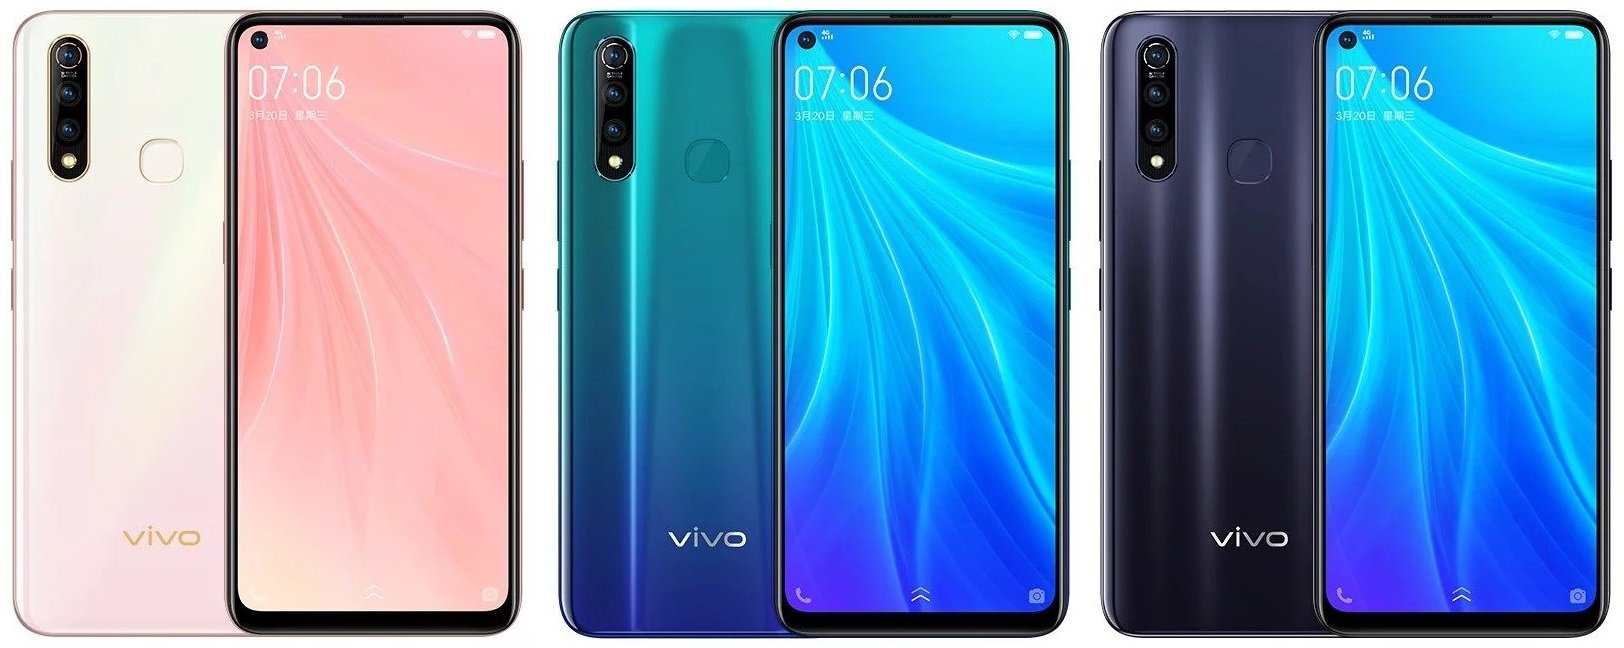 Vivo Z5X is silently upgraded to Snapdragon 712, now Z5x 712 | DroidAfrica